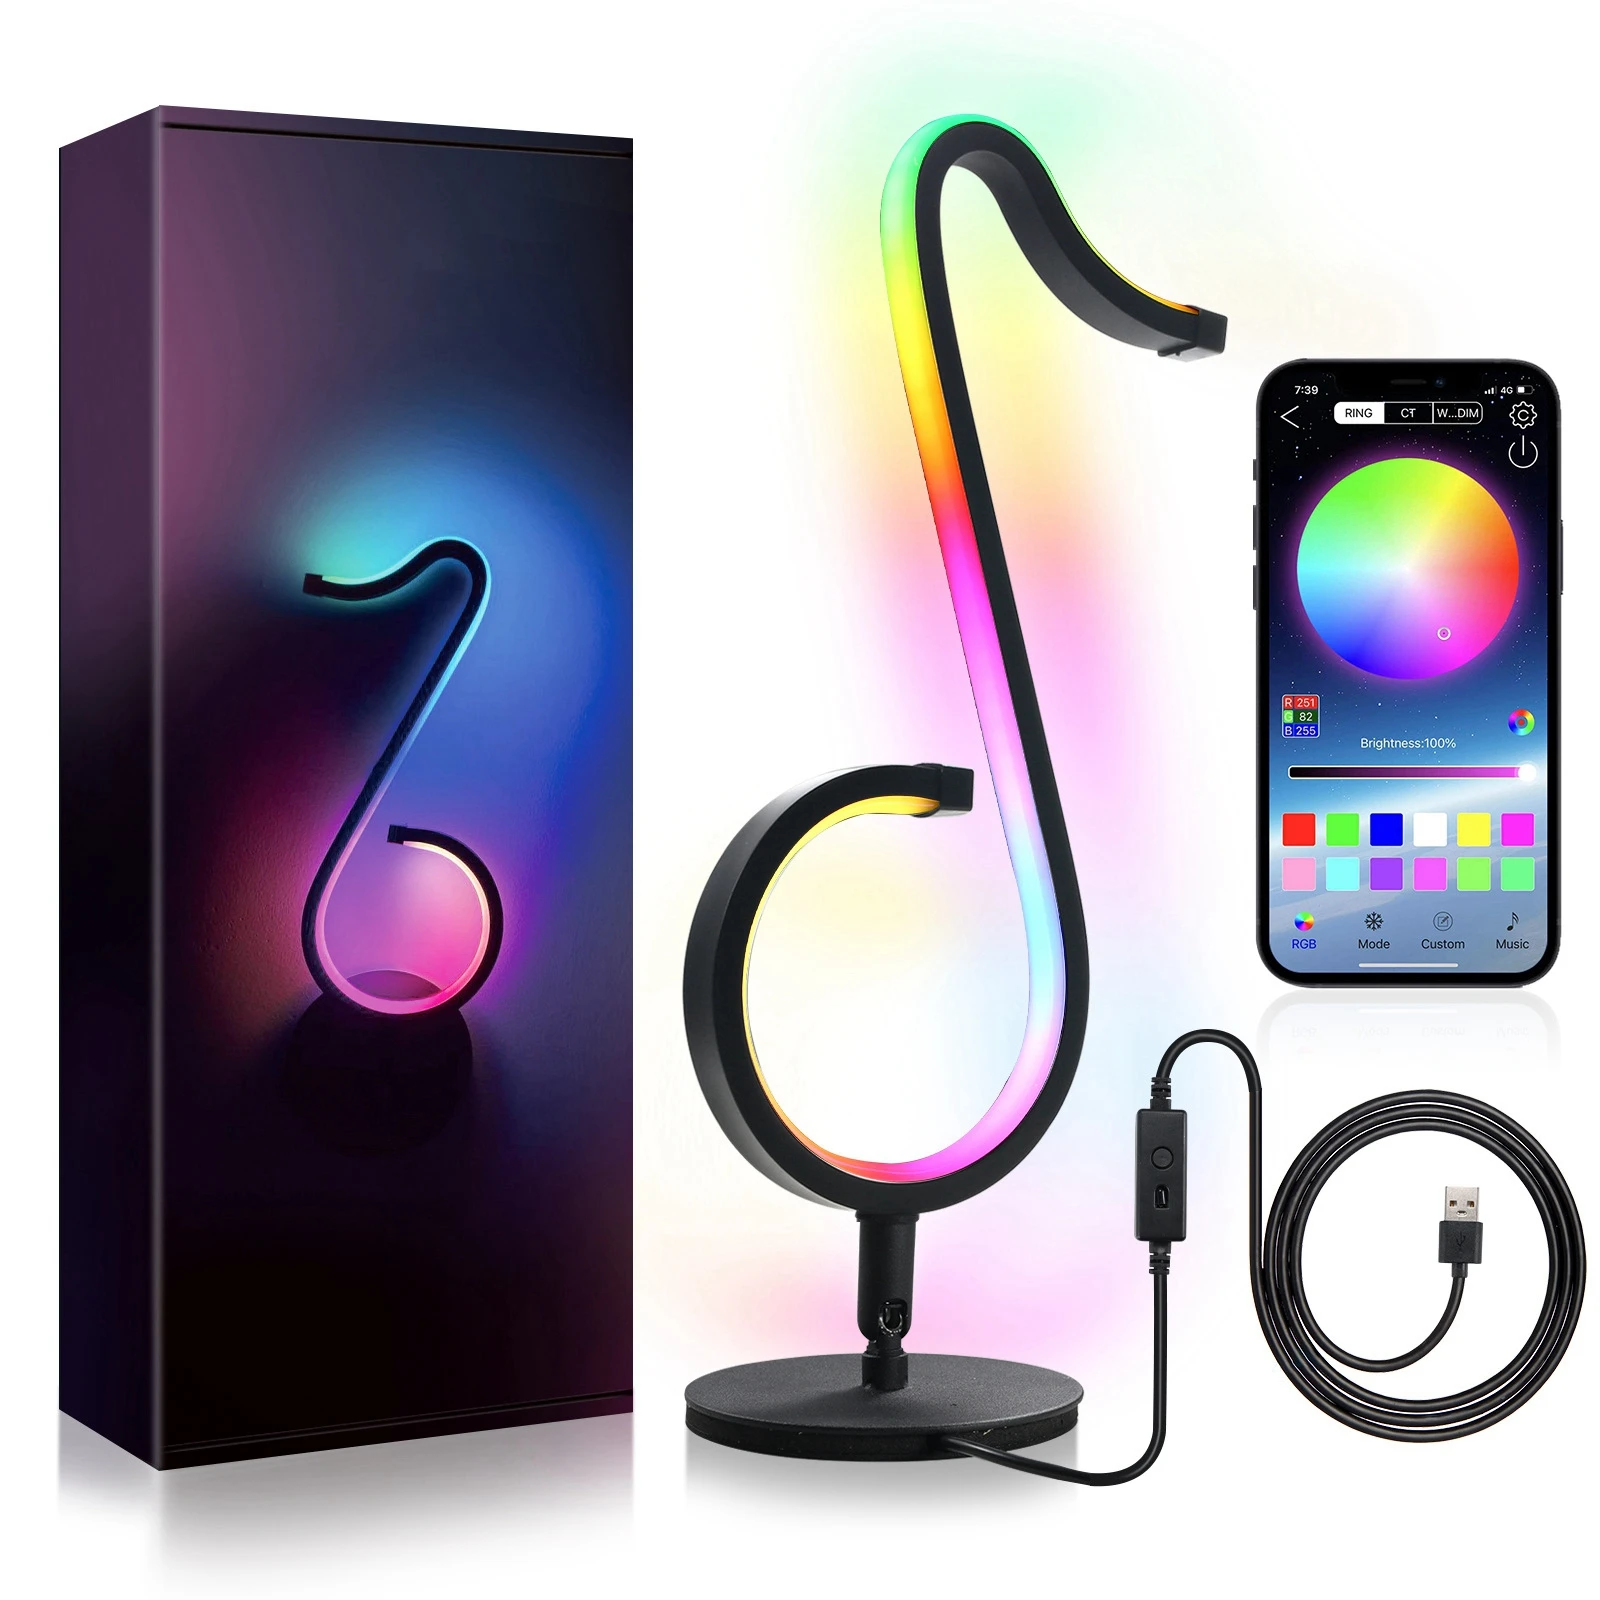 

RGB Musical Note Atmosphere Lights USB Smart APP Control Dimmable Symphony Table LED Beside Lamps Gifts Home Bedroom Bar Decor